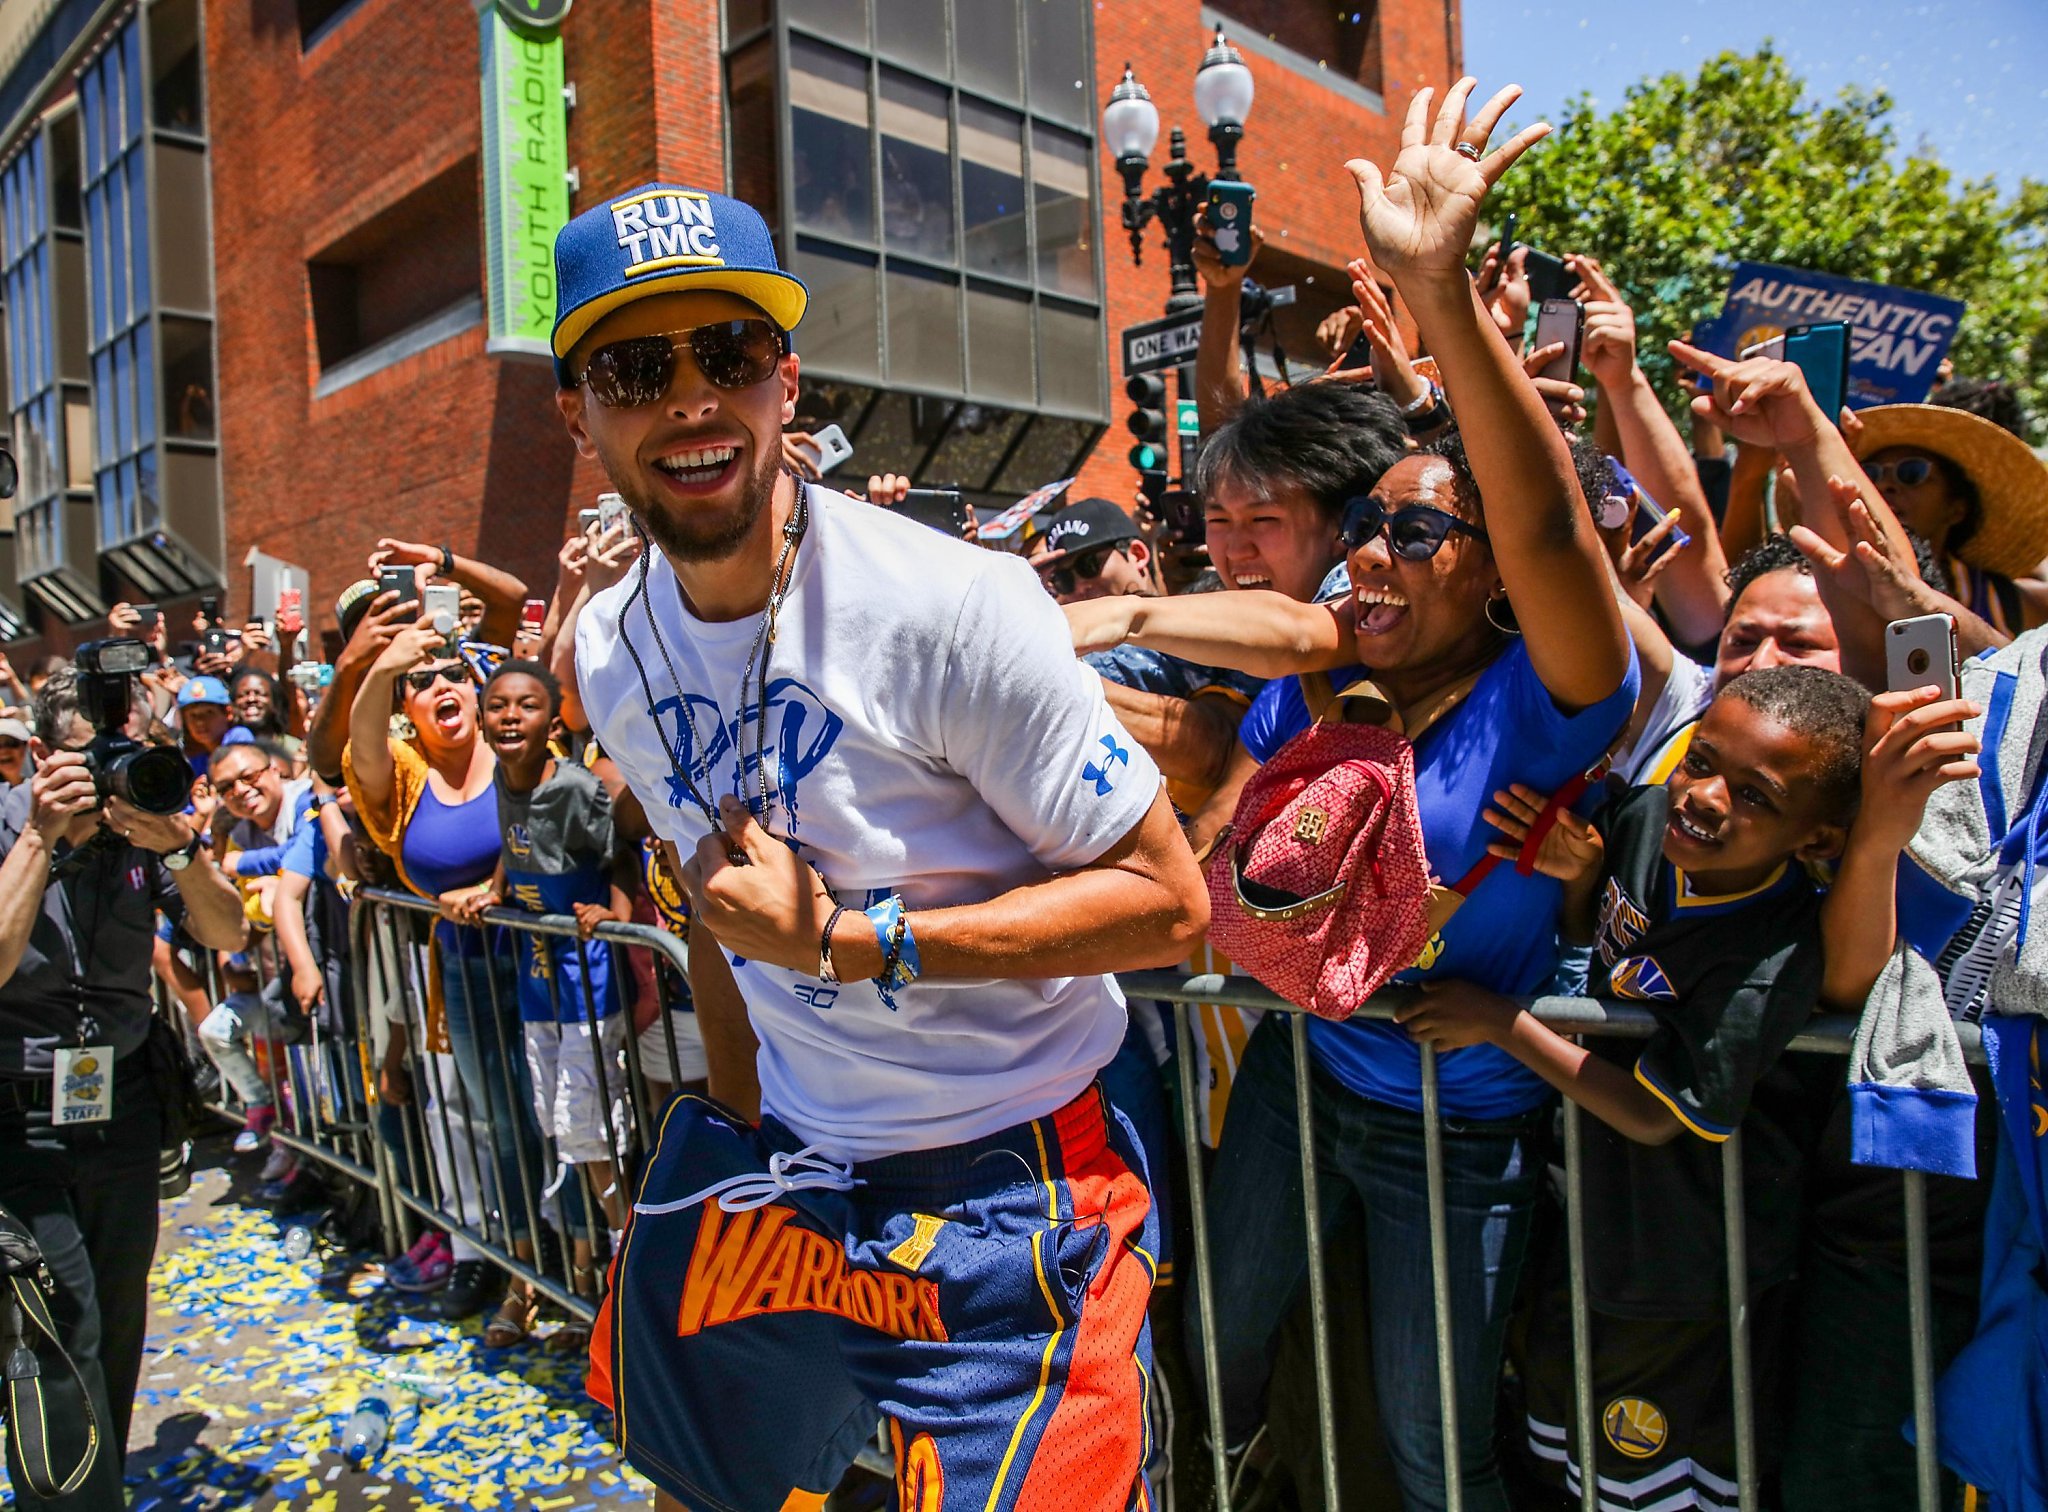 The Currys celebrated the end of the Warriors parade at this legendary  Oakland spot